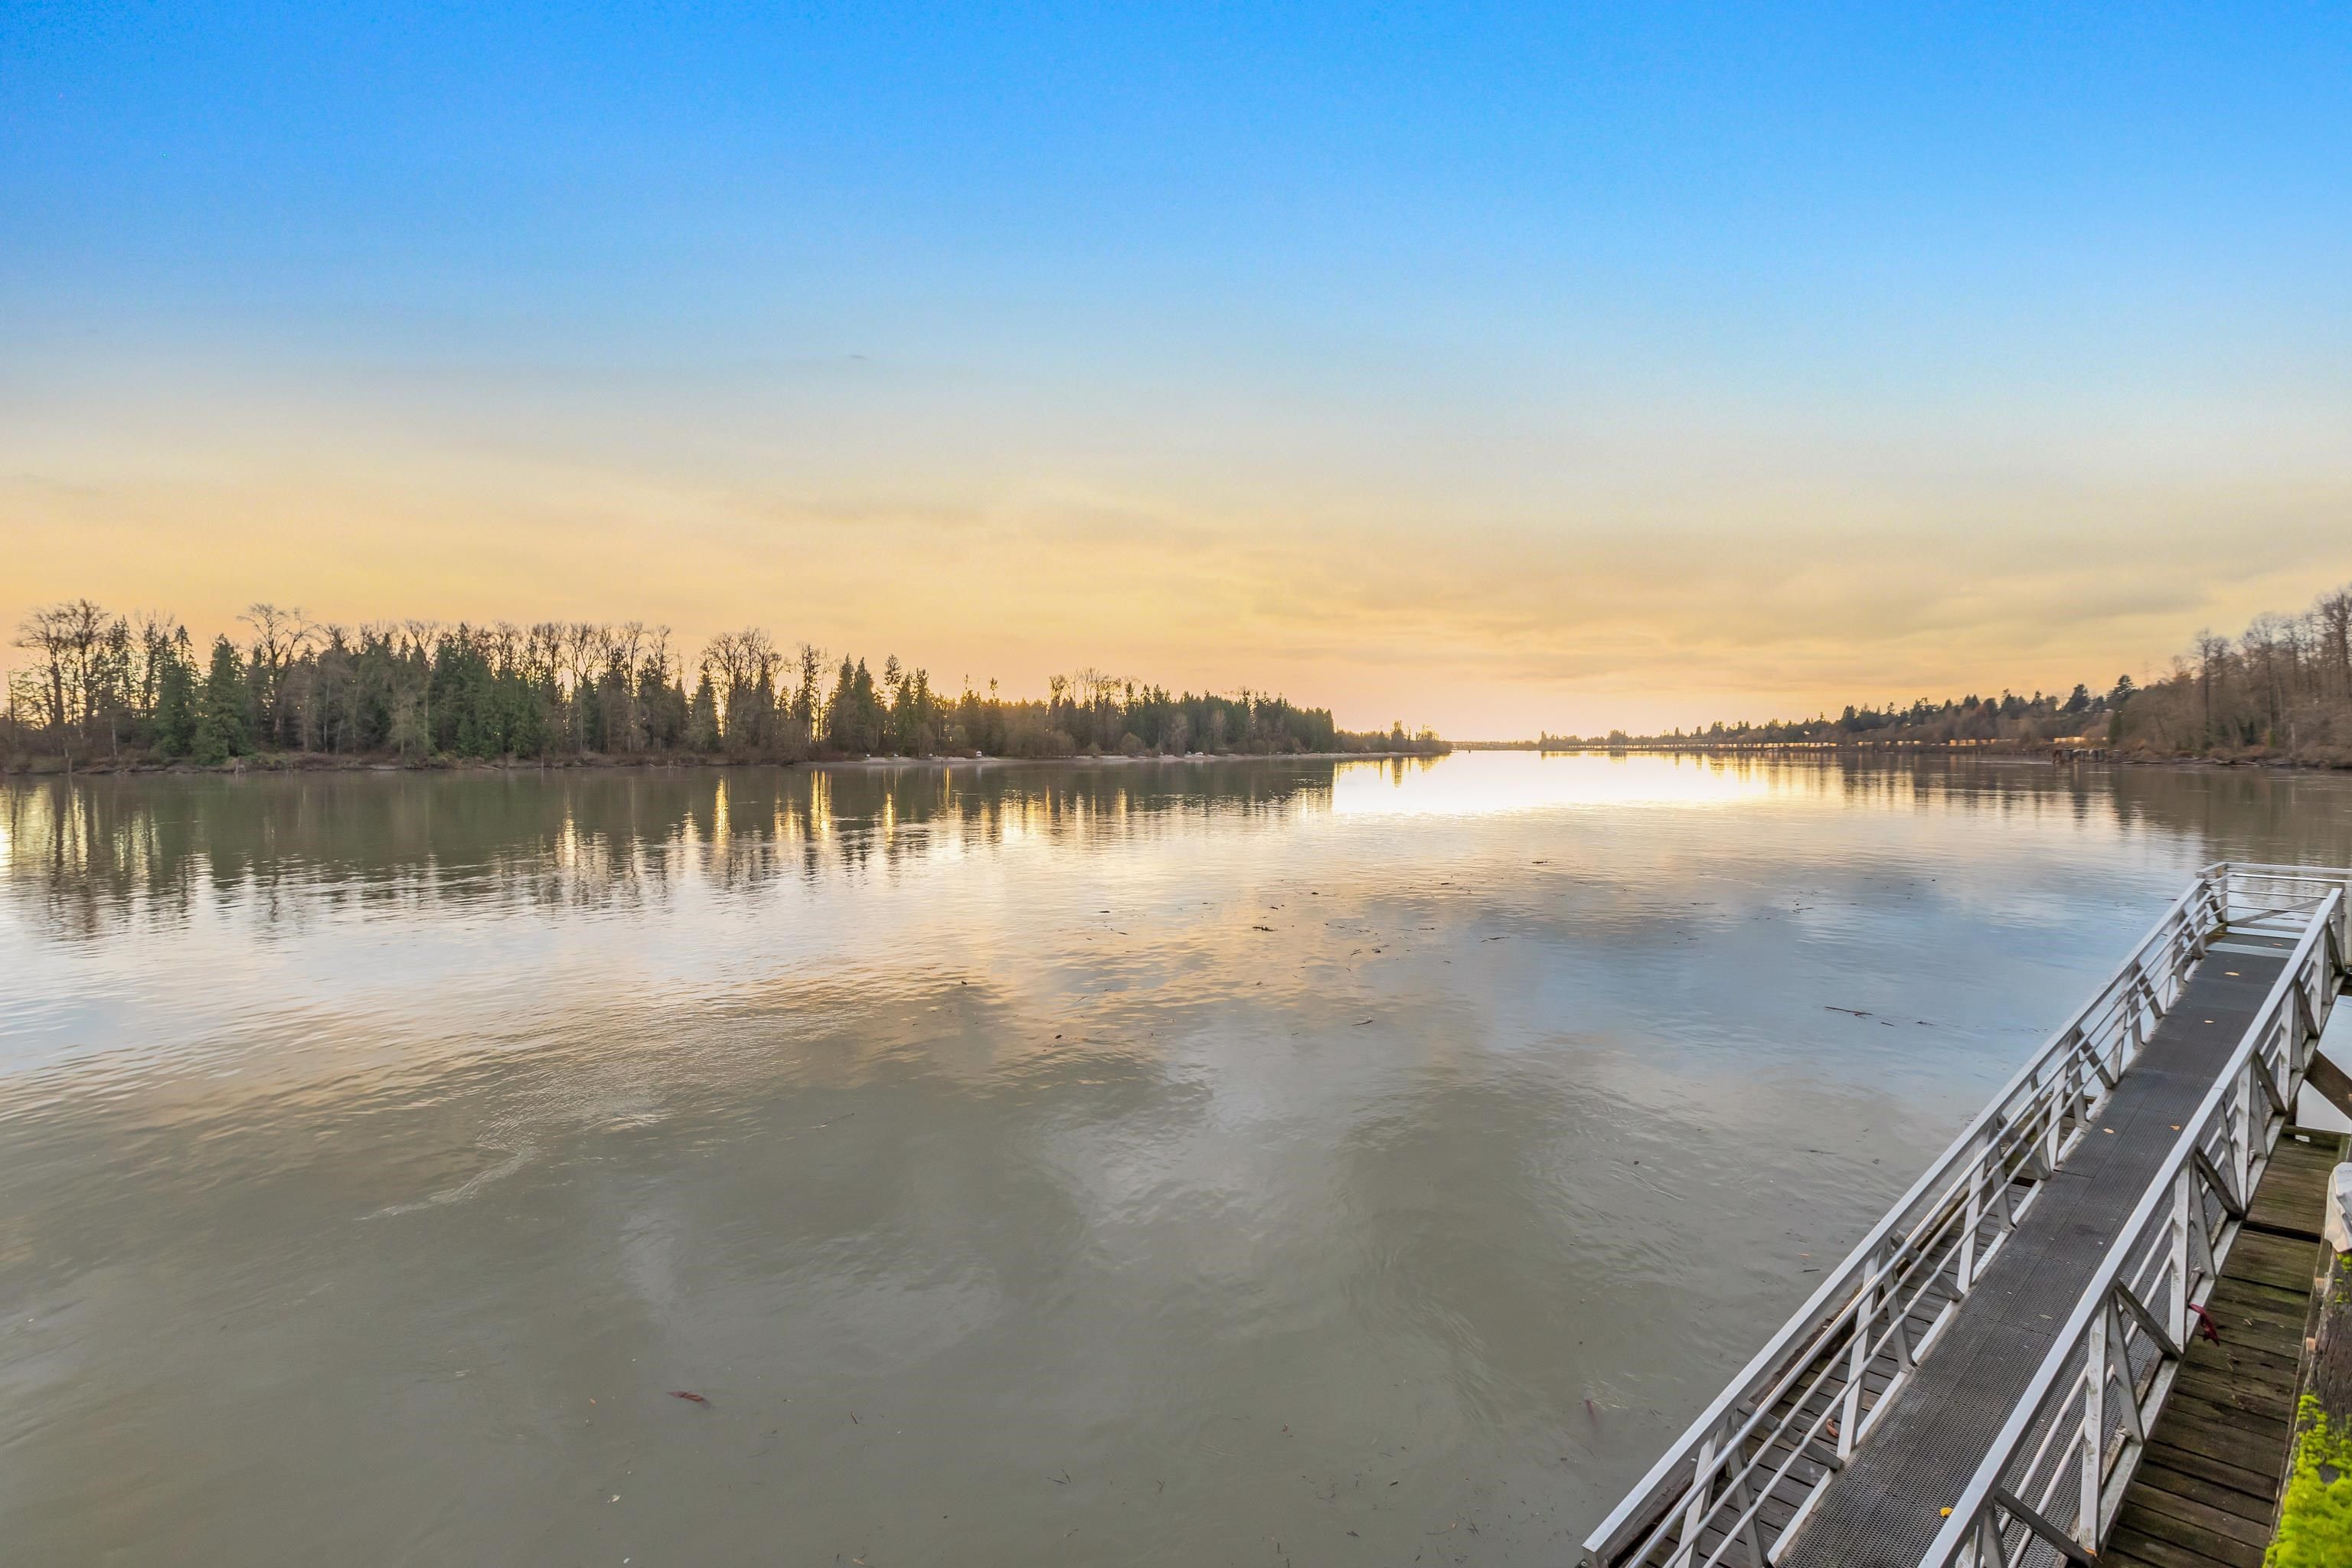 Stunning 180 degree view of the Fraser River